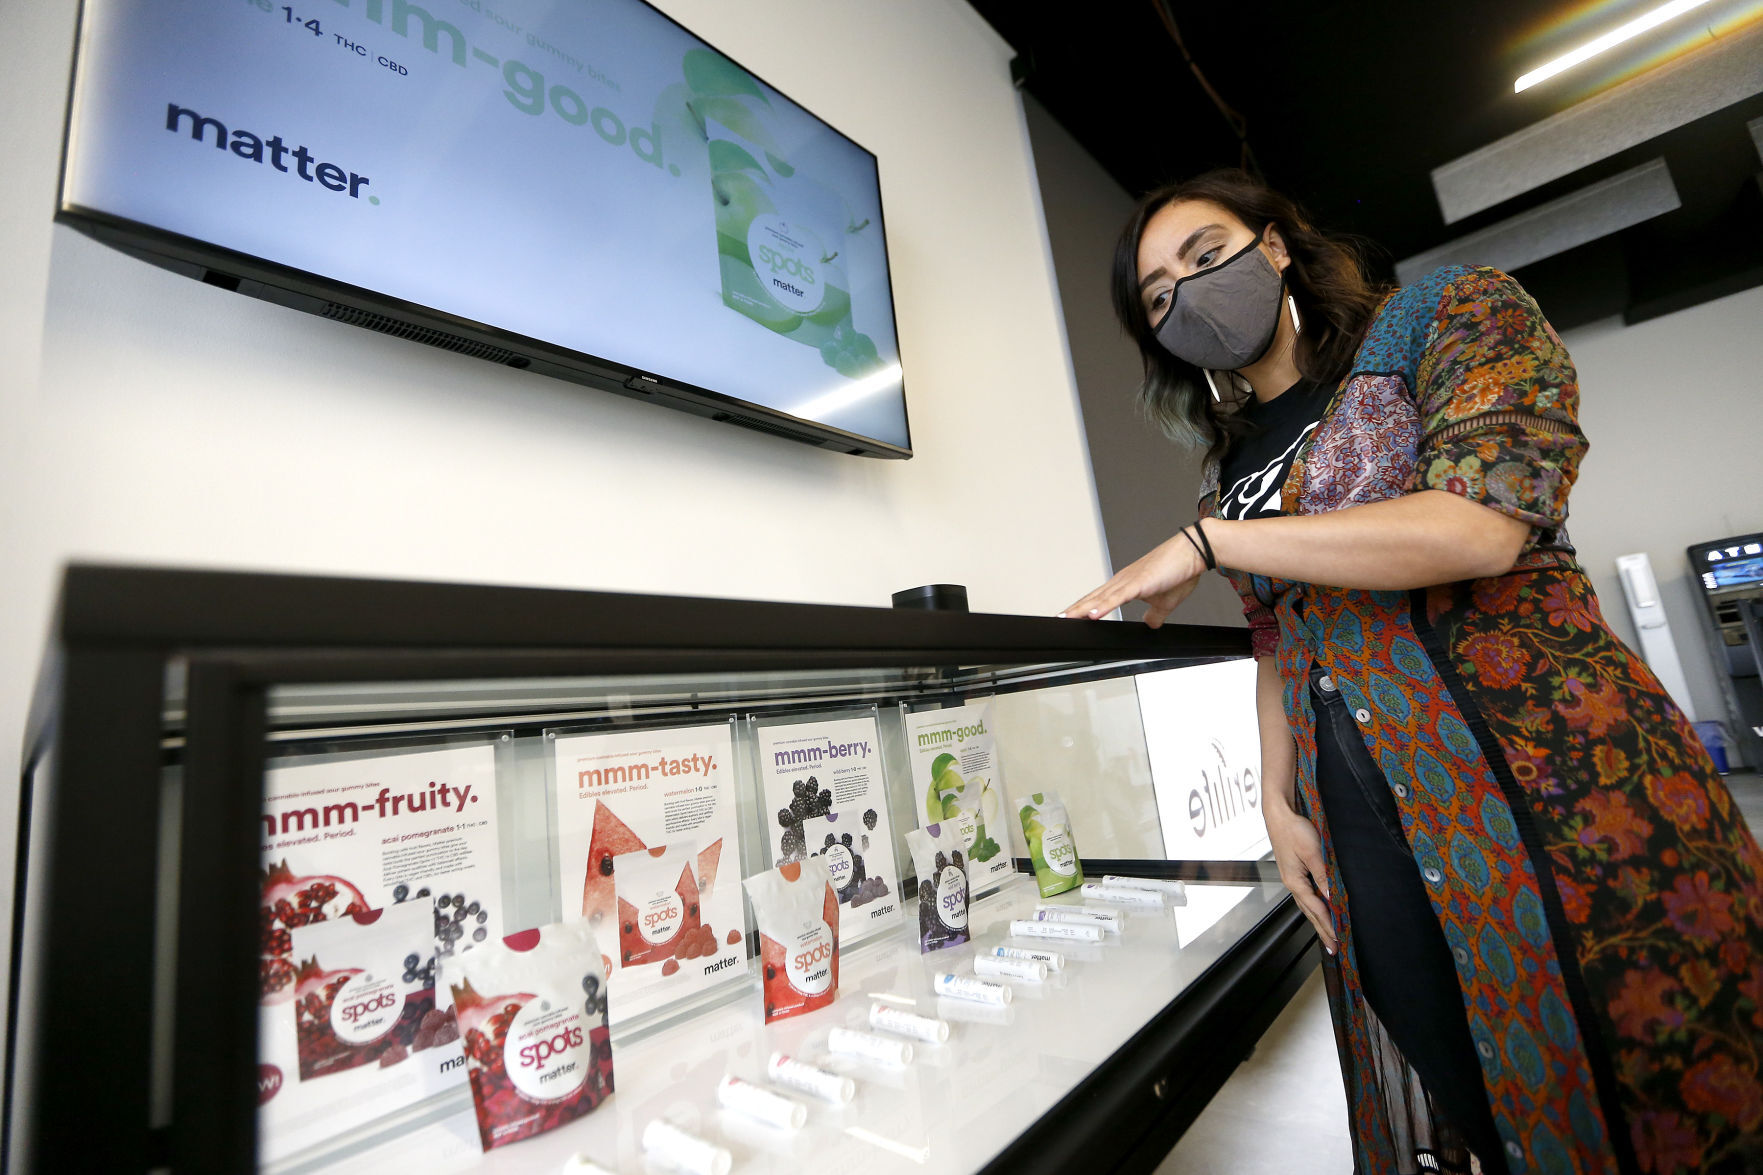 Divina Capellupo, Verilife district manager for the state of Illinois, shows some of the products offered at the dispensary in Galena, Ill., on Wednesday. PHOTO CREDIT: Dave Kettering